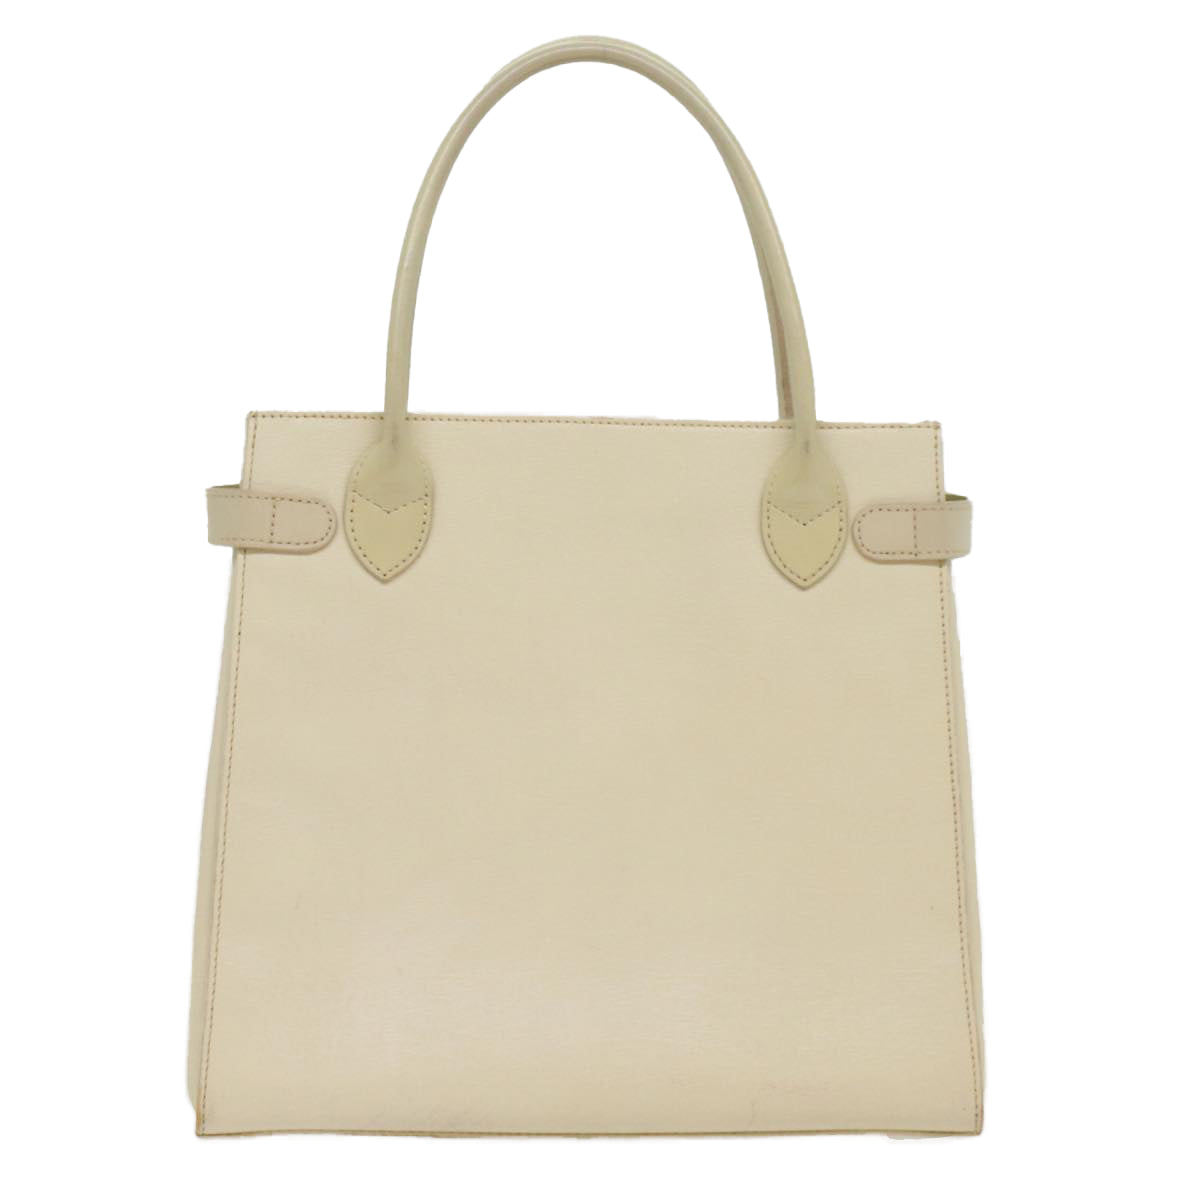 Burberrys Tote Bag Leather White Auth bs8607